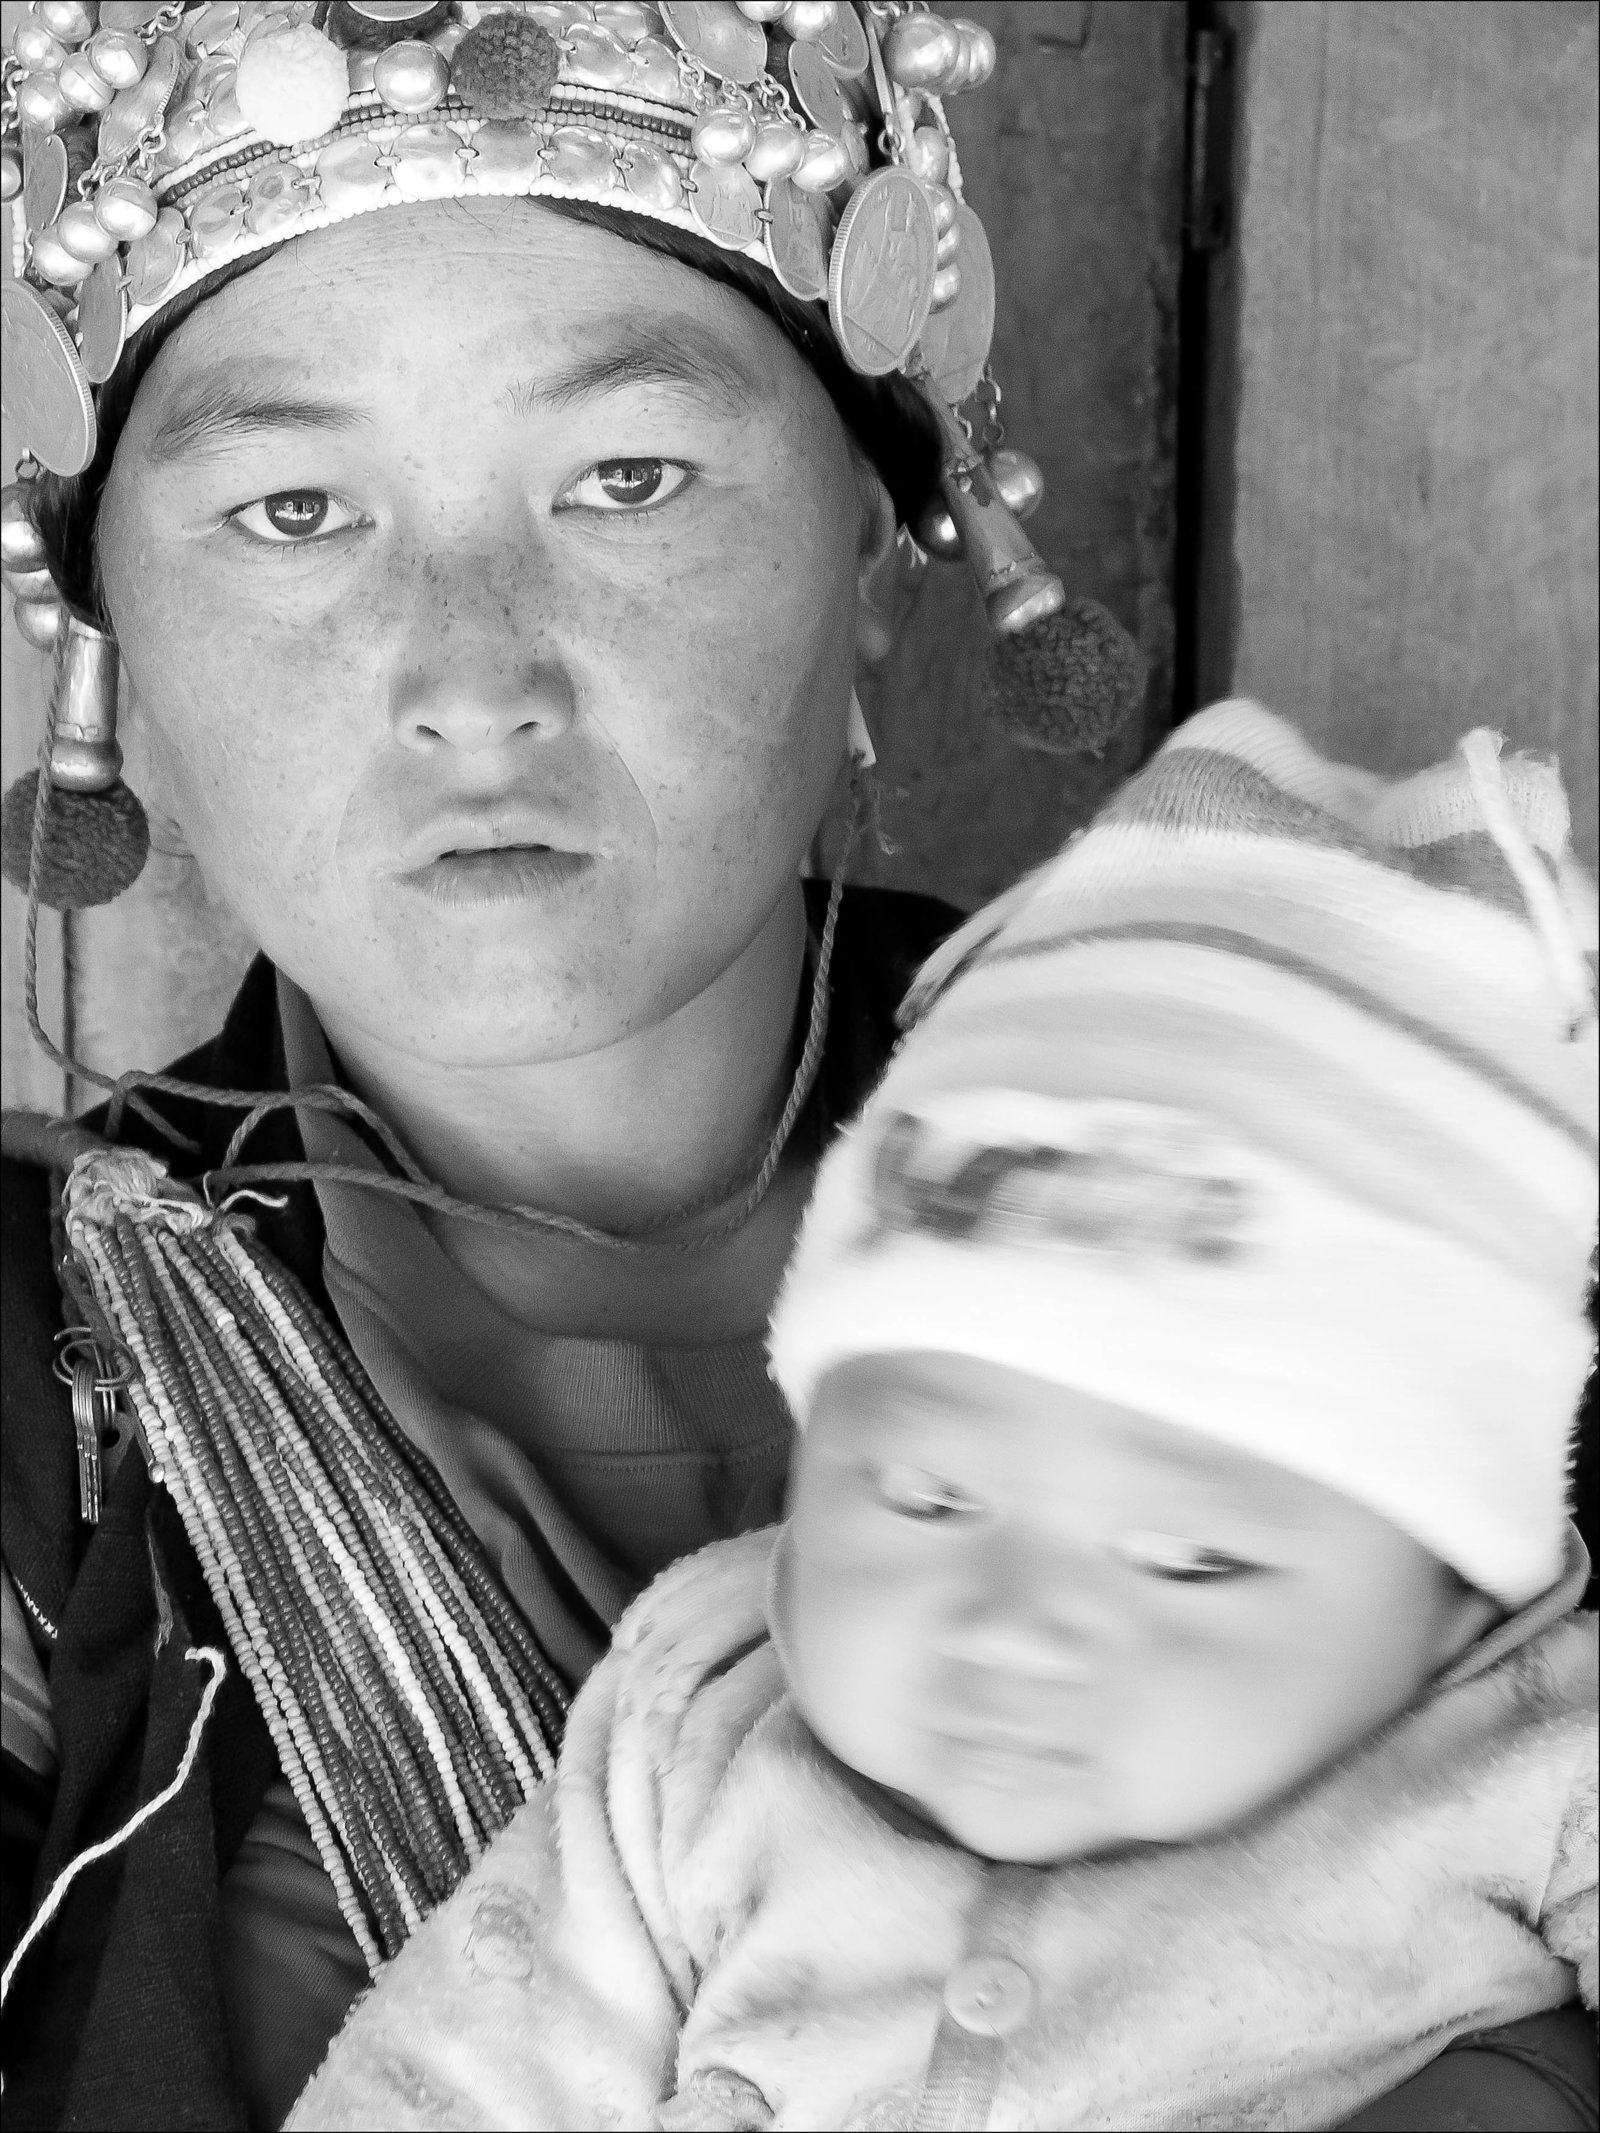 Lao mother and child in traditional garb